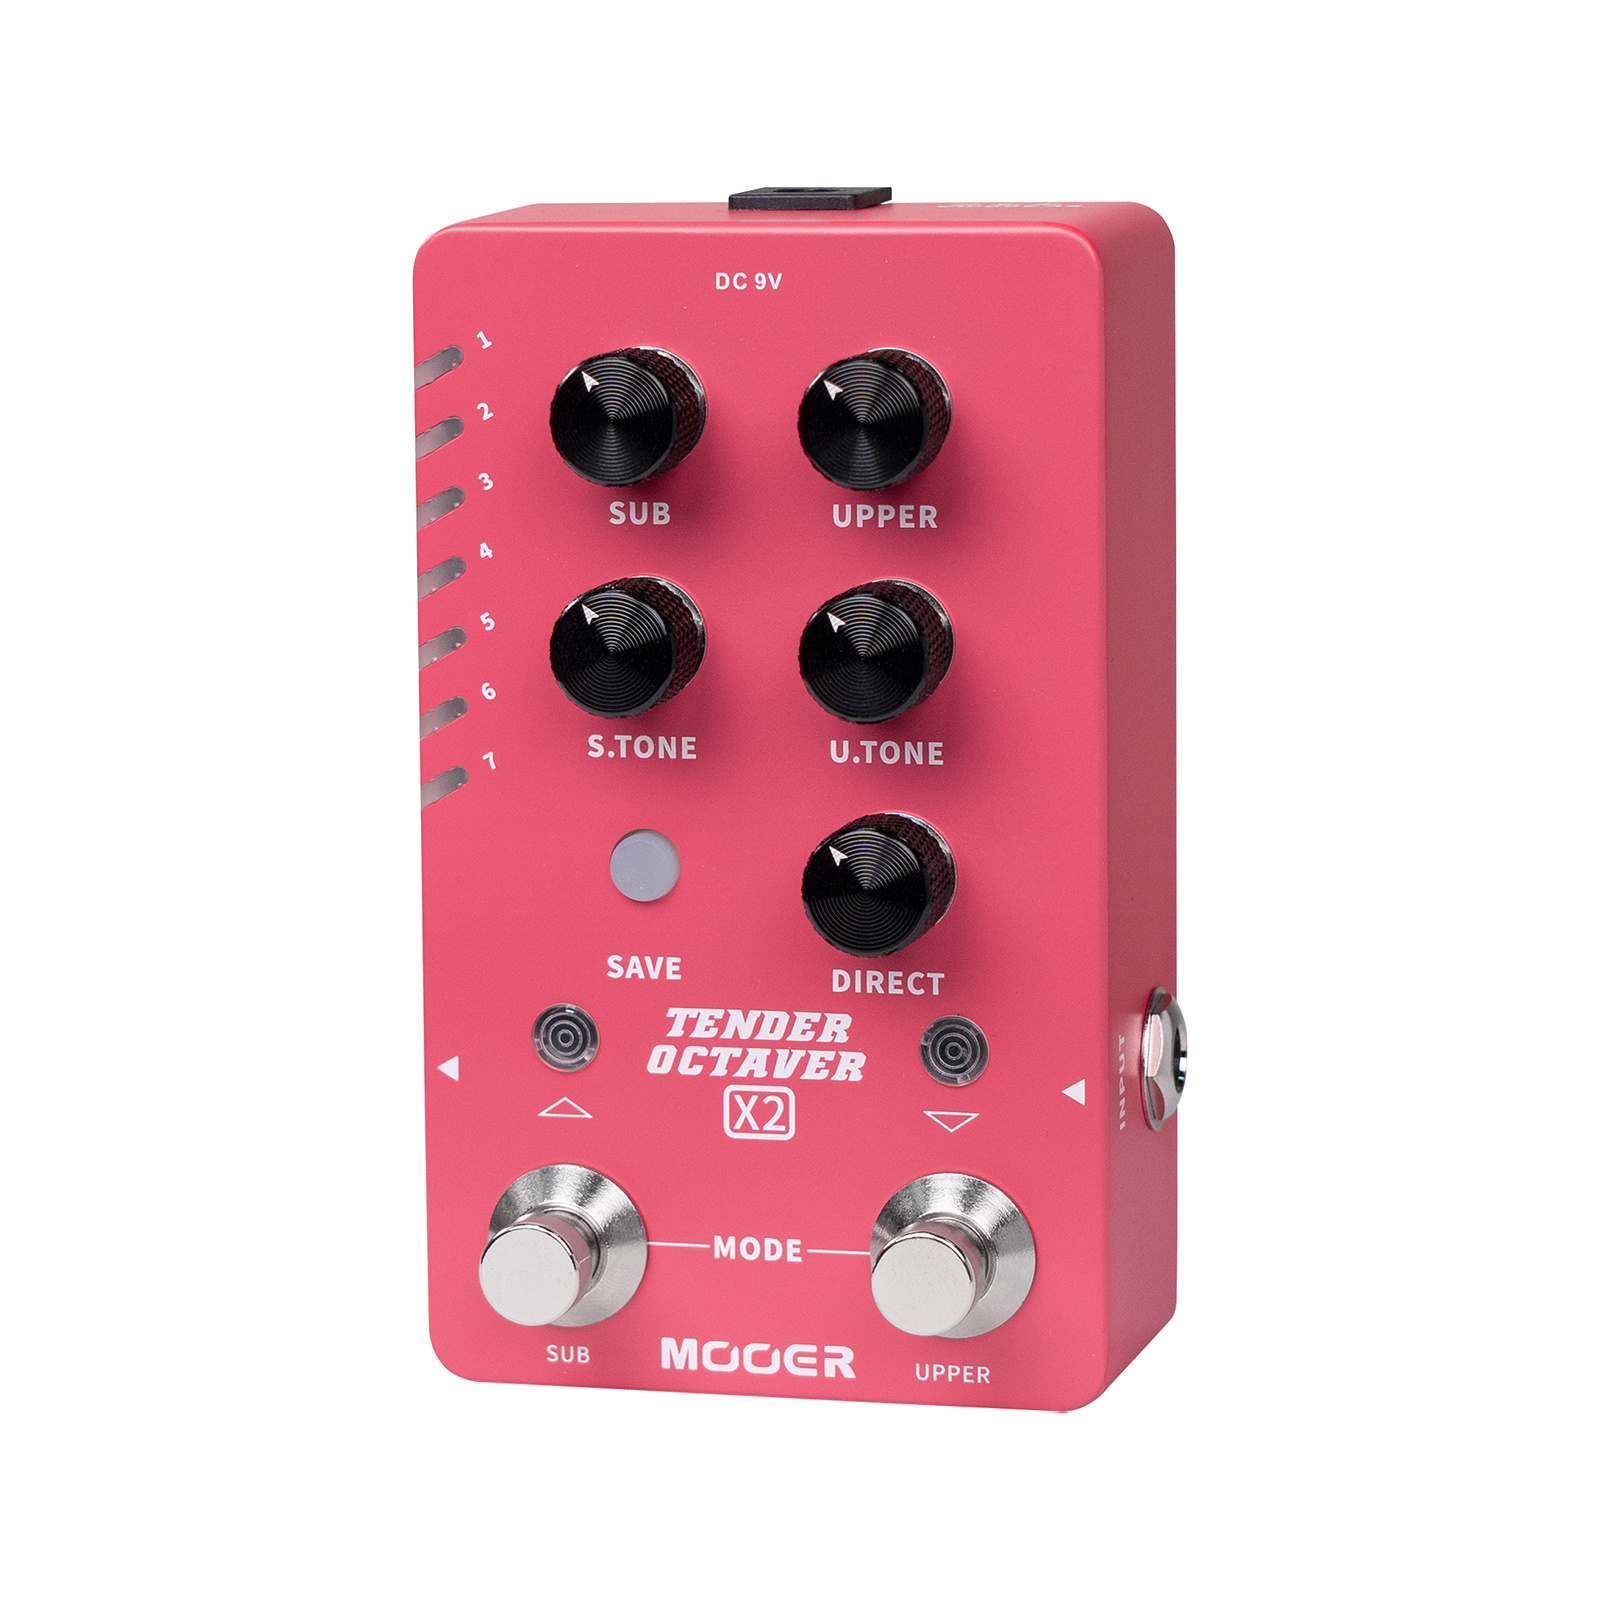 NEW ->X2 Series->PRODUCTS->PEDAL